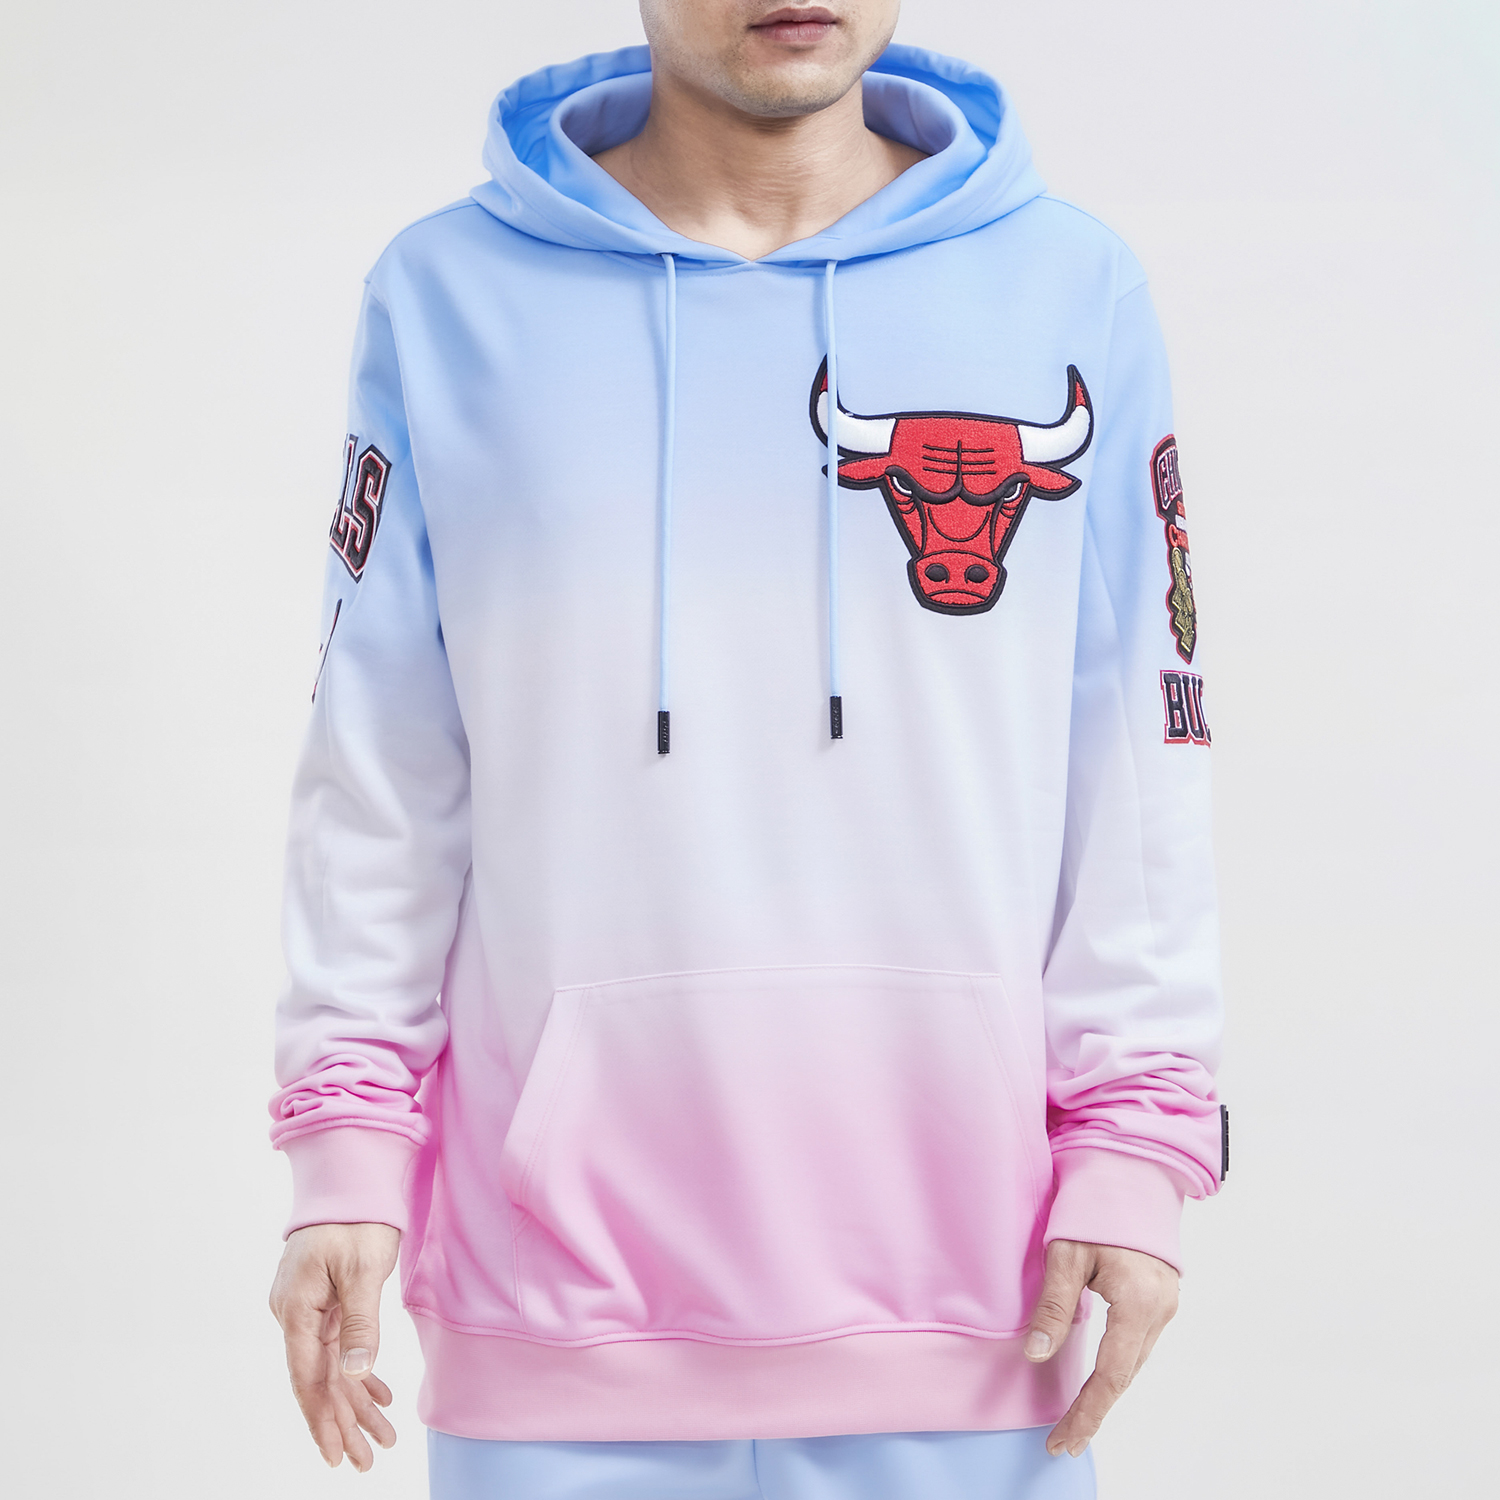 pro-standard-chicago-bulls-ombre-pink-blue-hoodie